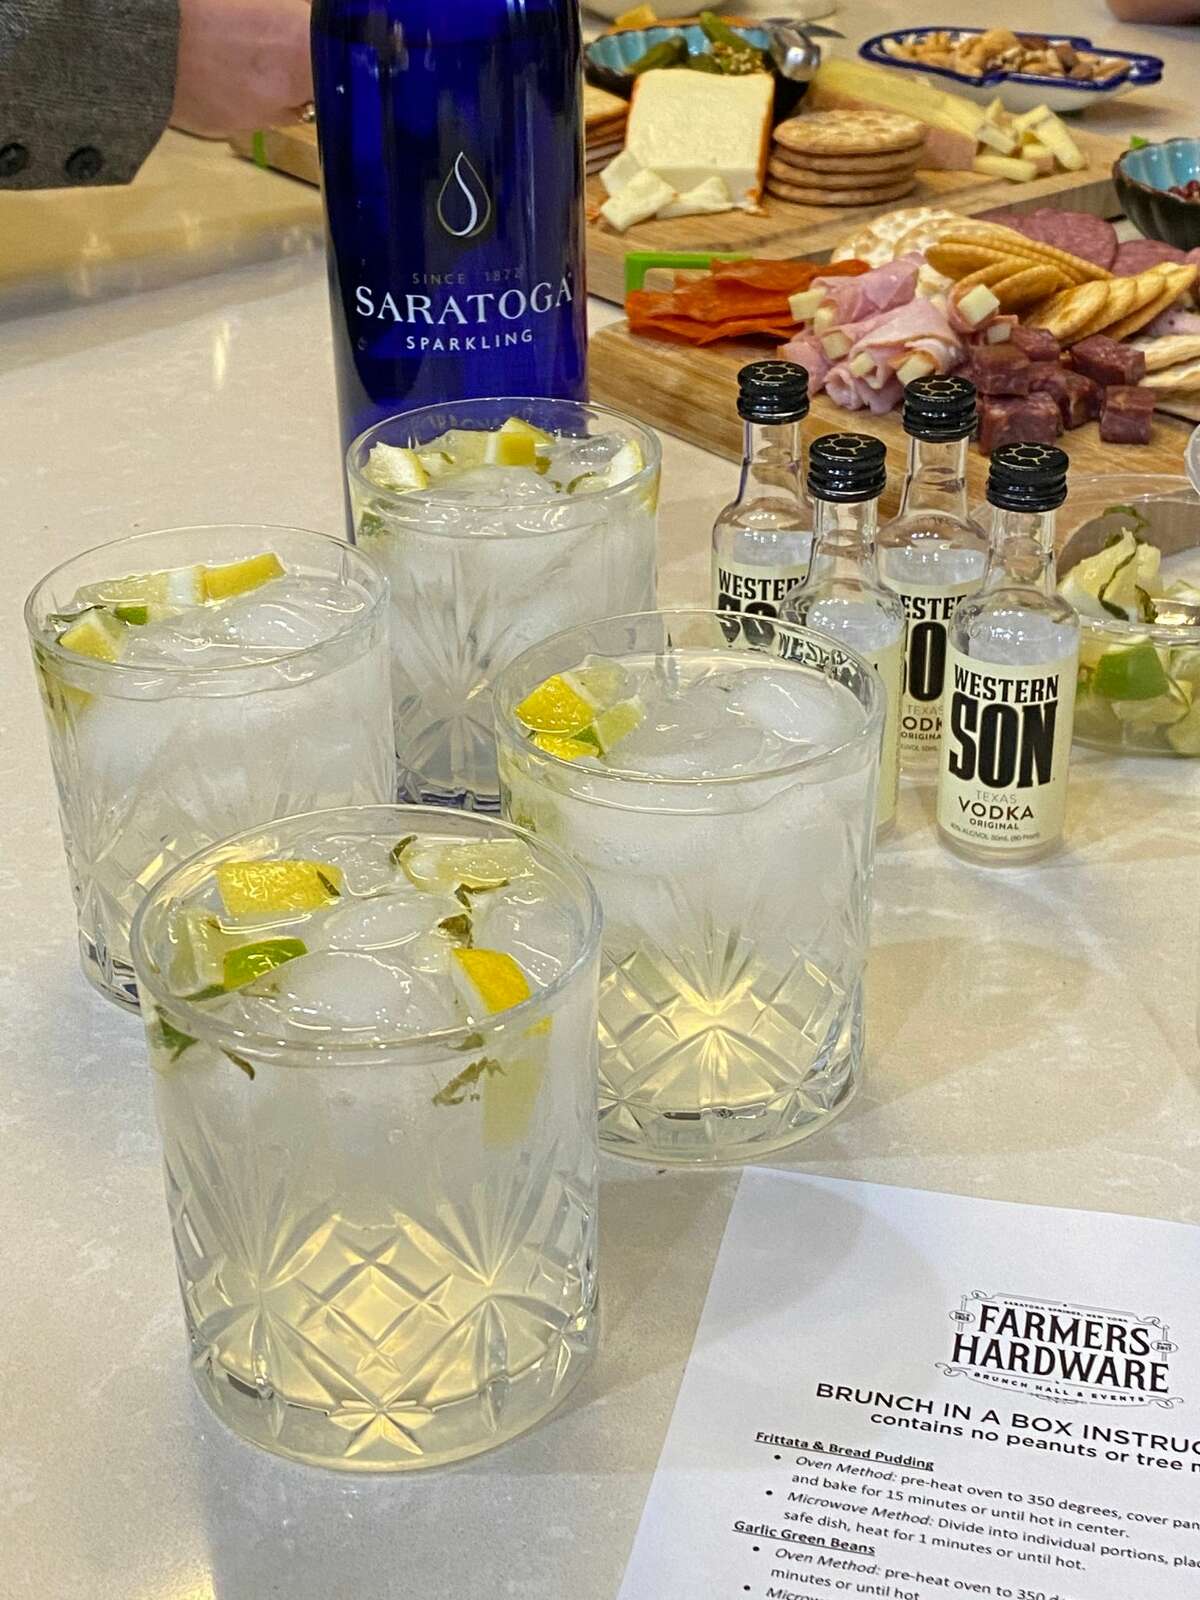 "We followed the spiked sparkling lemonade instructions to layer the fresh-cut citrus, fresh lemonade and vodka miniatures." Get more details and how to order.